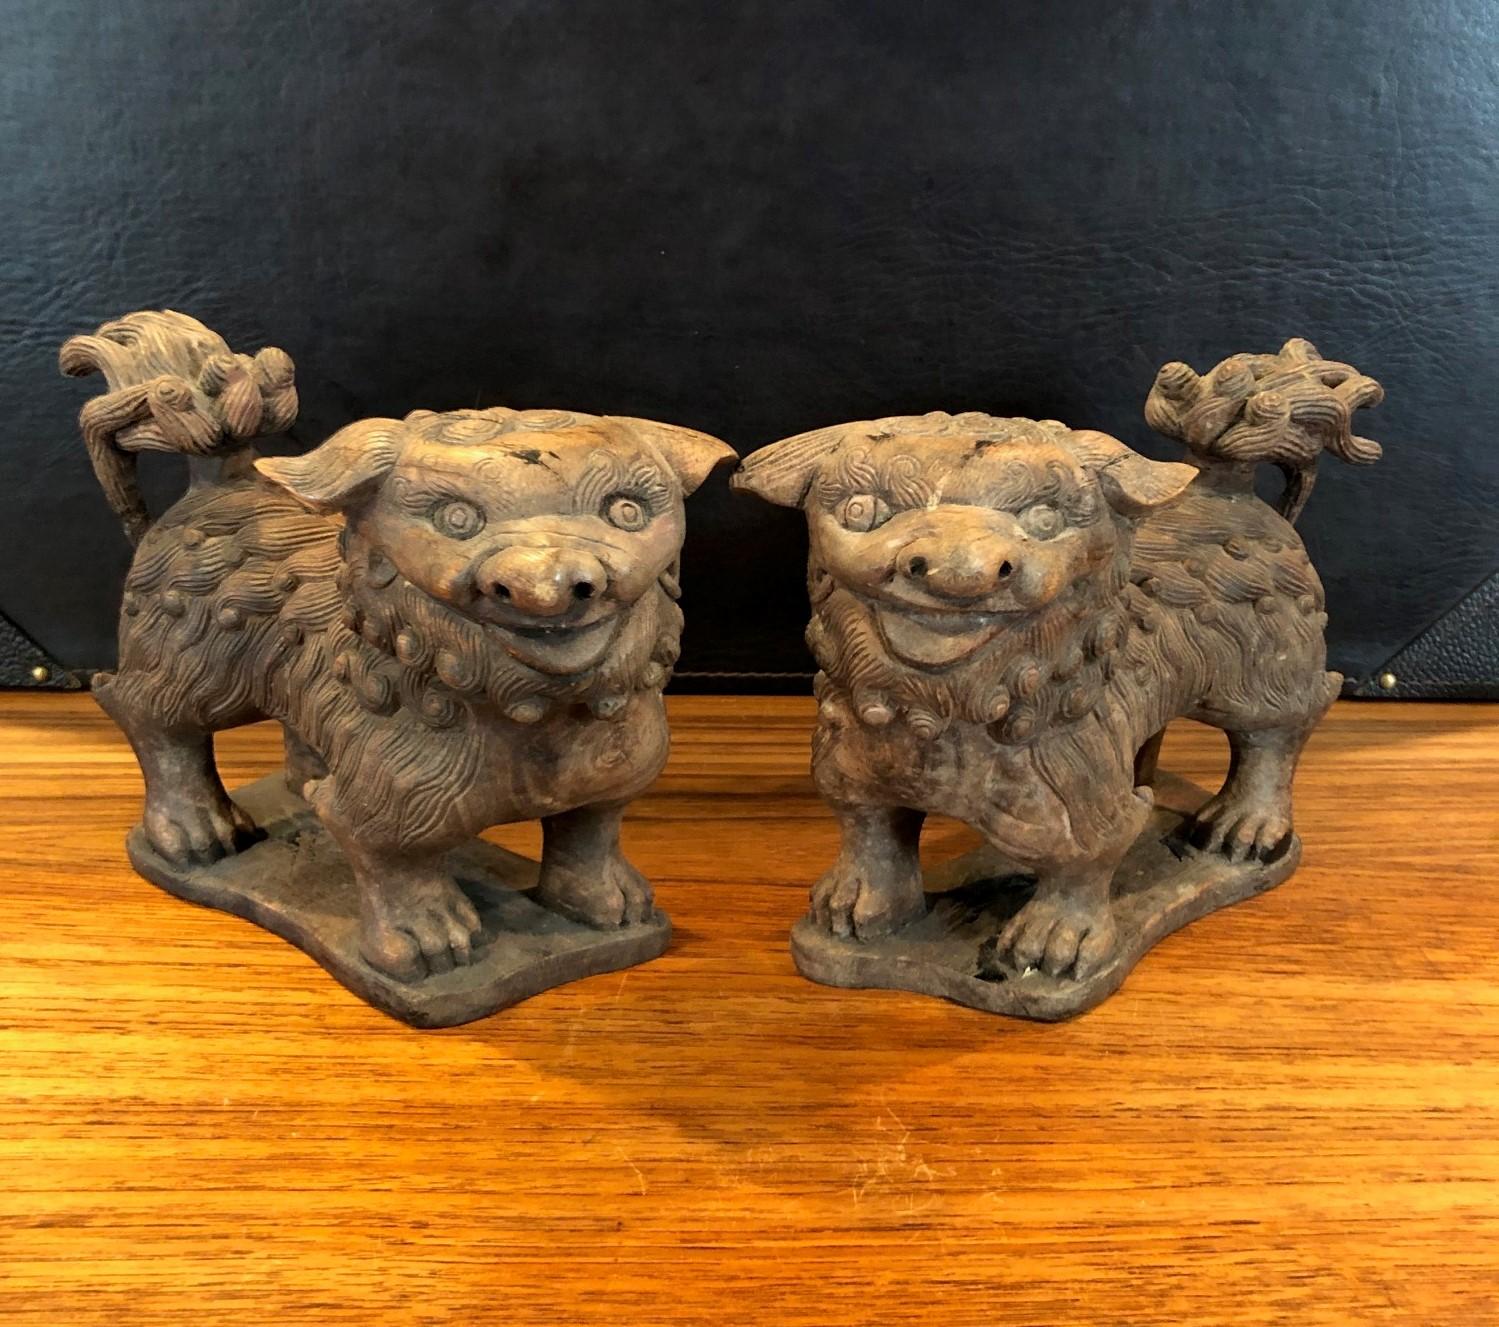 A very nice pair of antique hand carved Chinese foo dogs or bookends which I believe are made from elm or another type of hardwood. Nice patina and look!